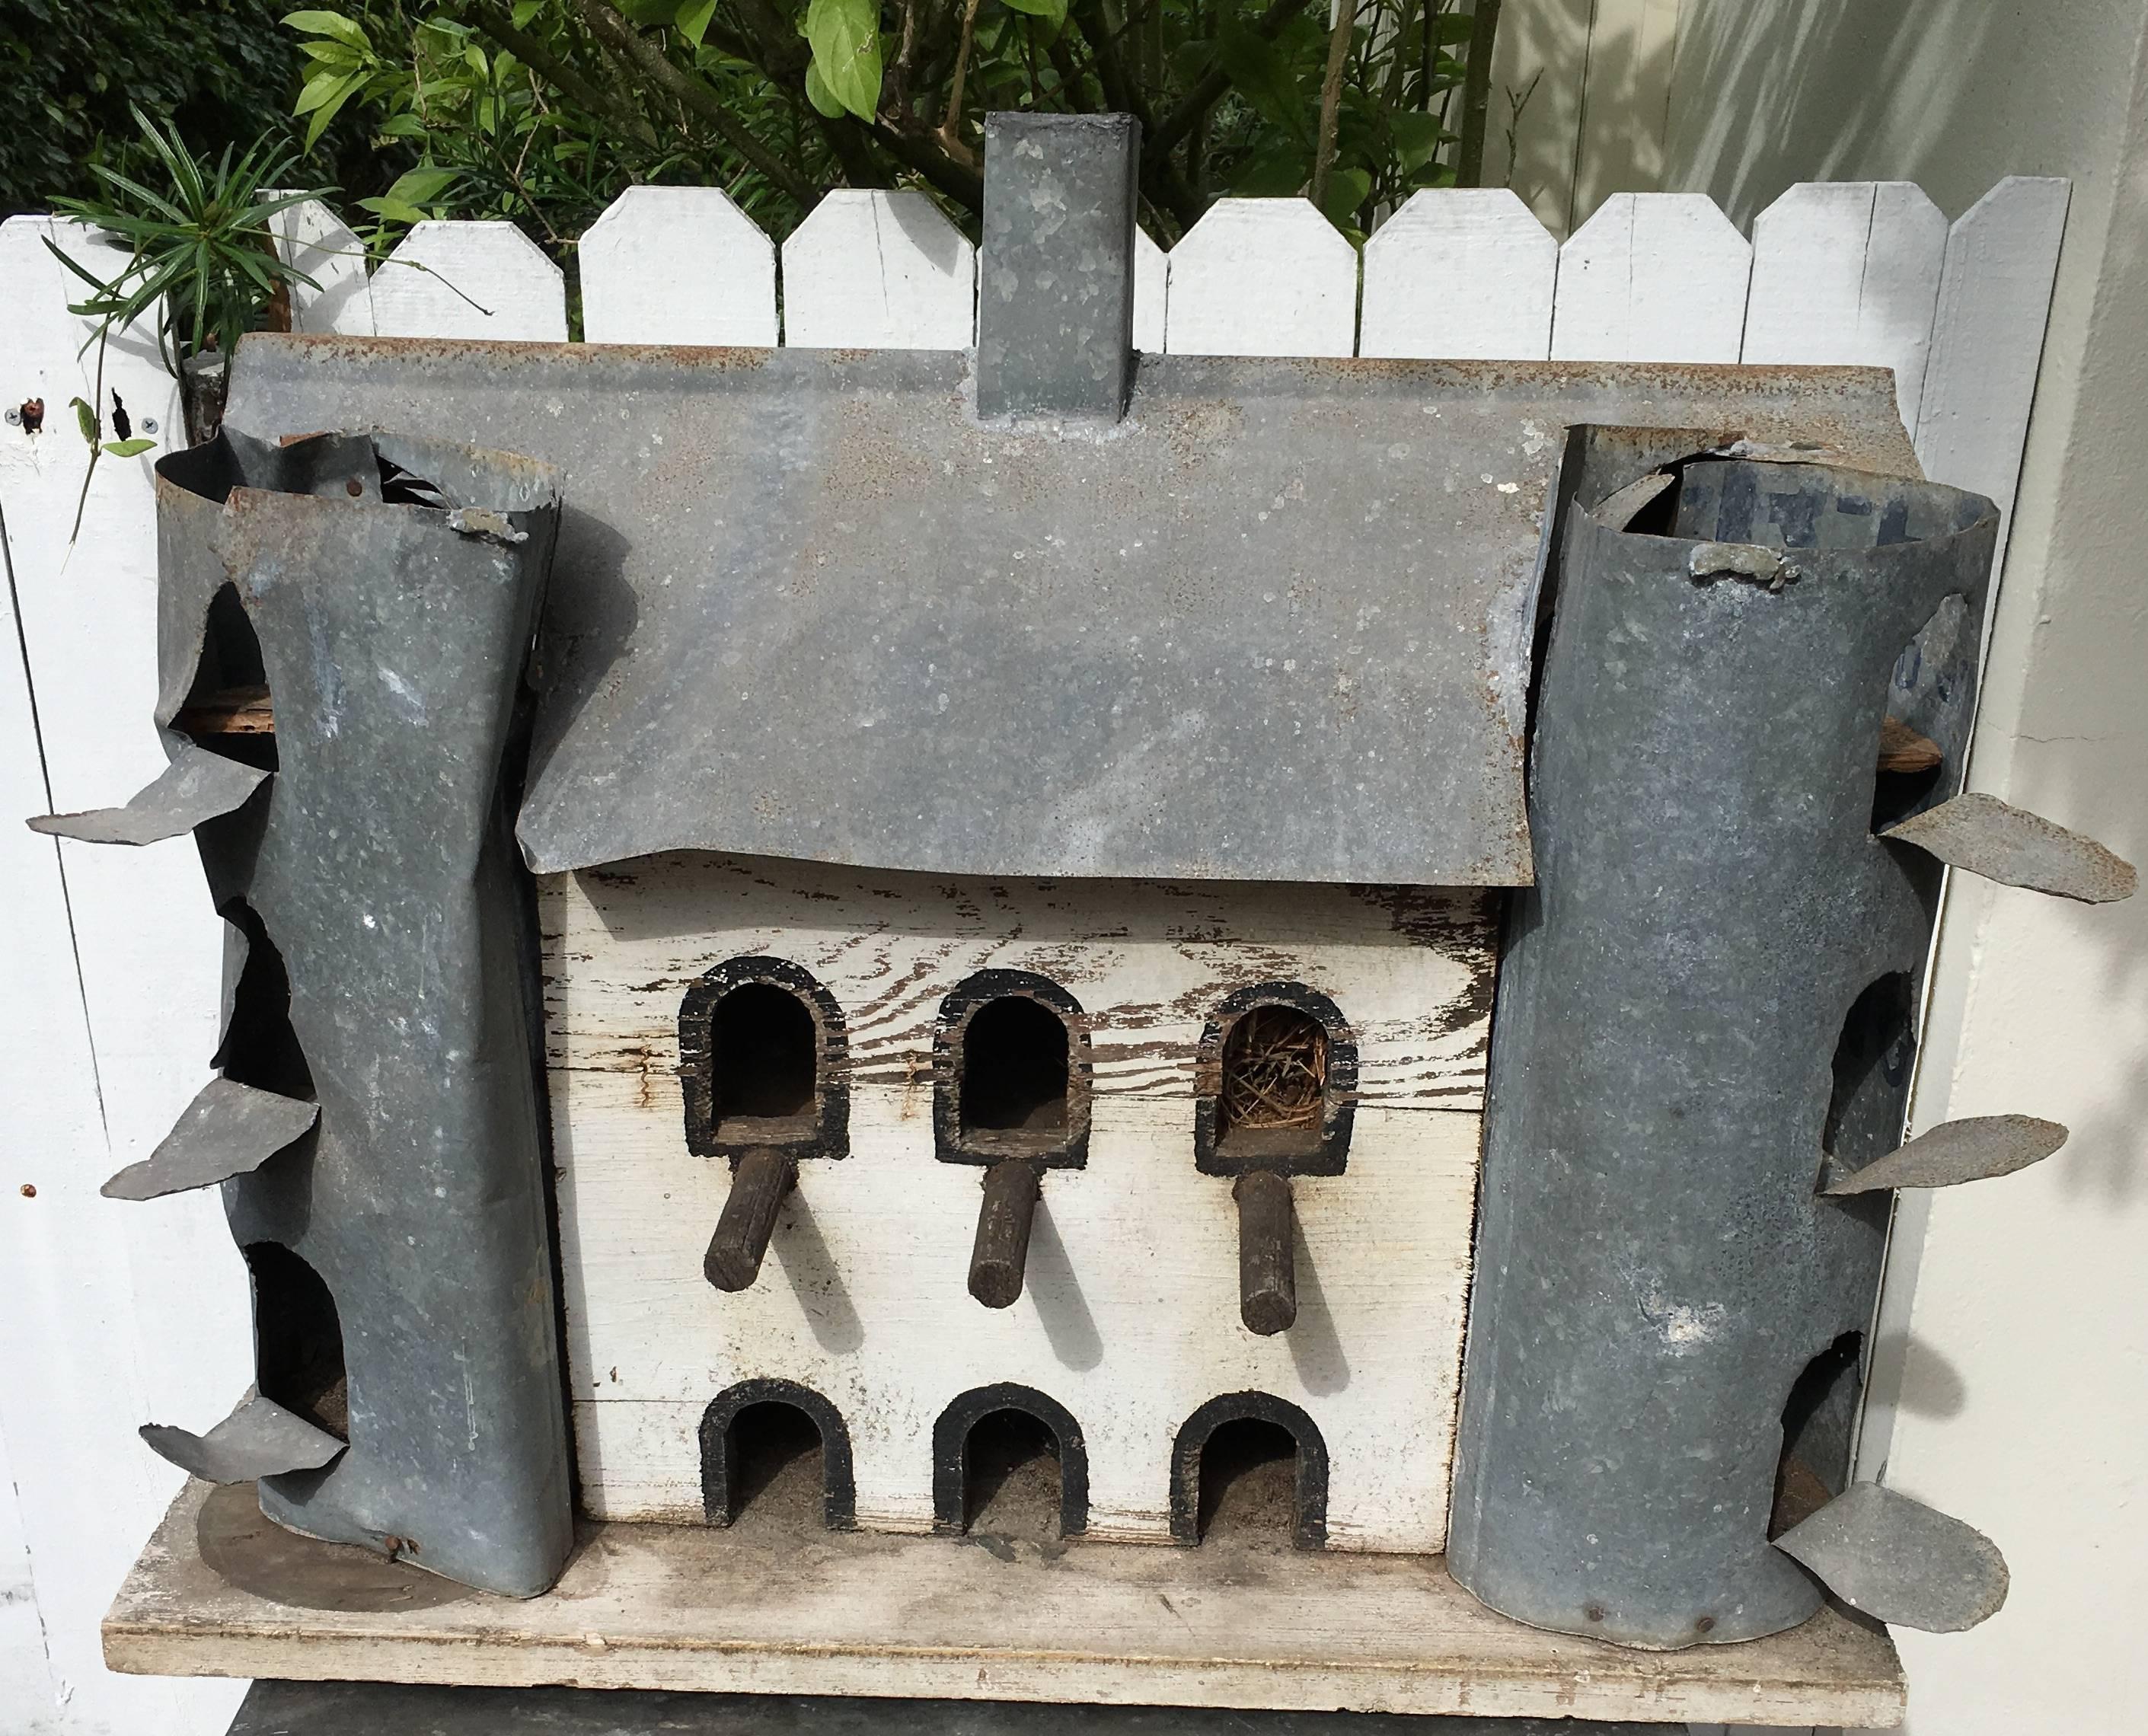 Birdhouse for Purple Martins in the form of a wooden barn with galvanized steel silos, roof and chimney. Straw from last-used nest is still in situ within barn. See upper right-hand window in photo image 6.